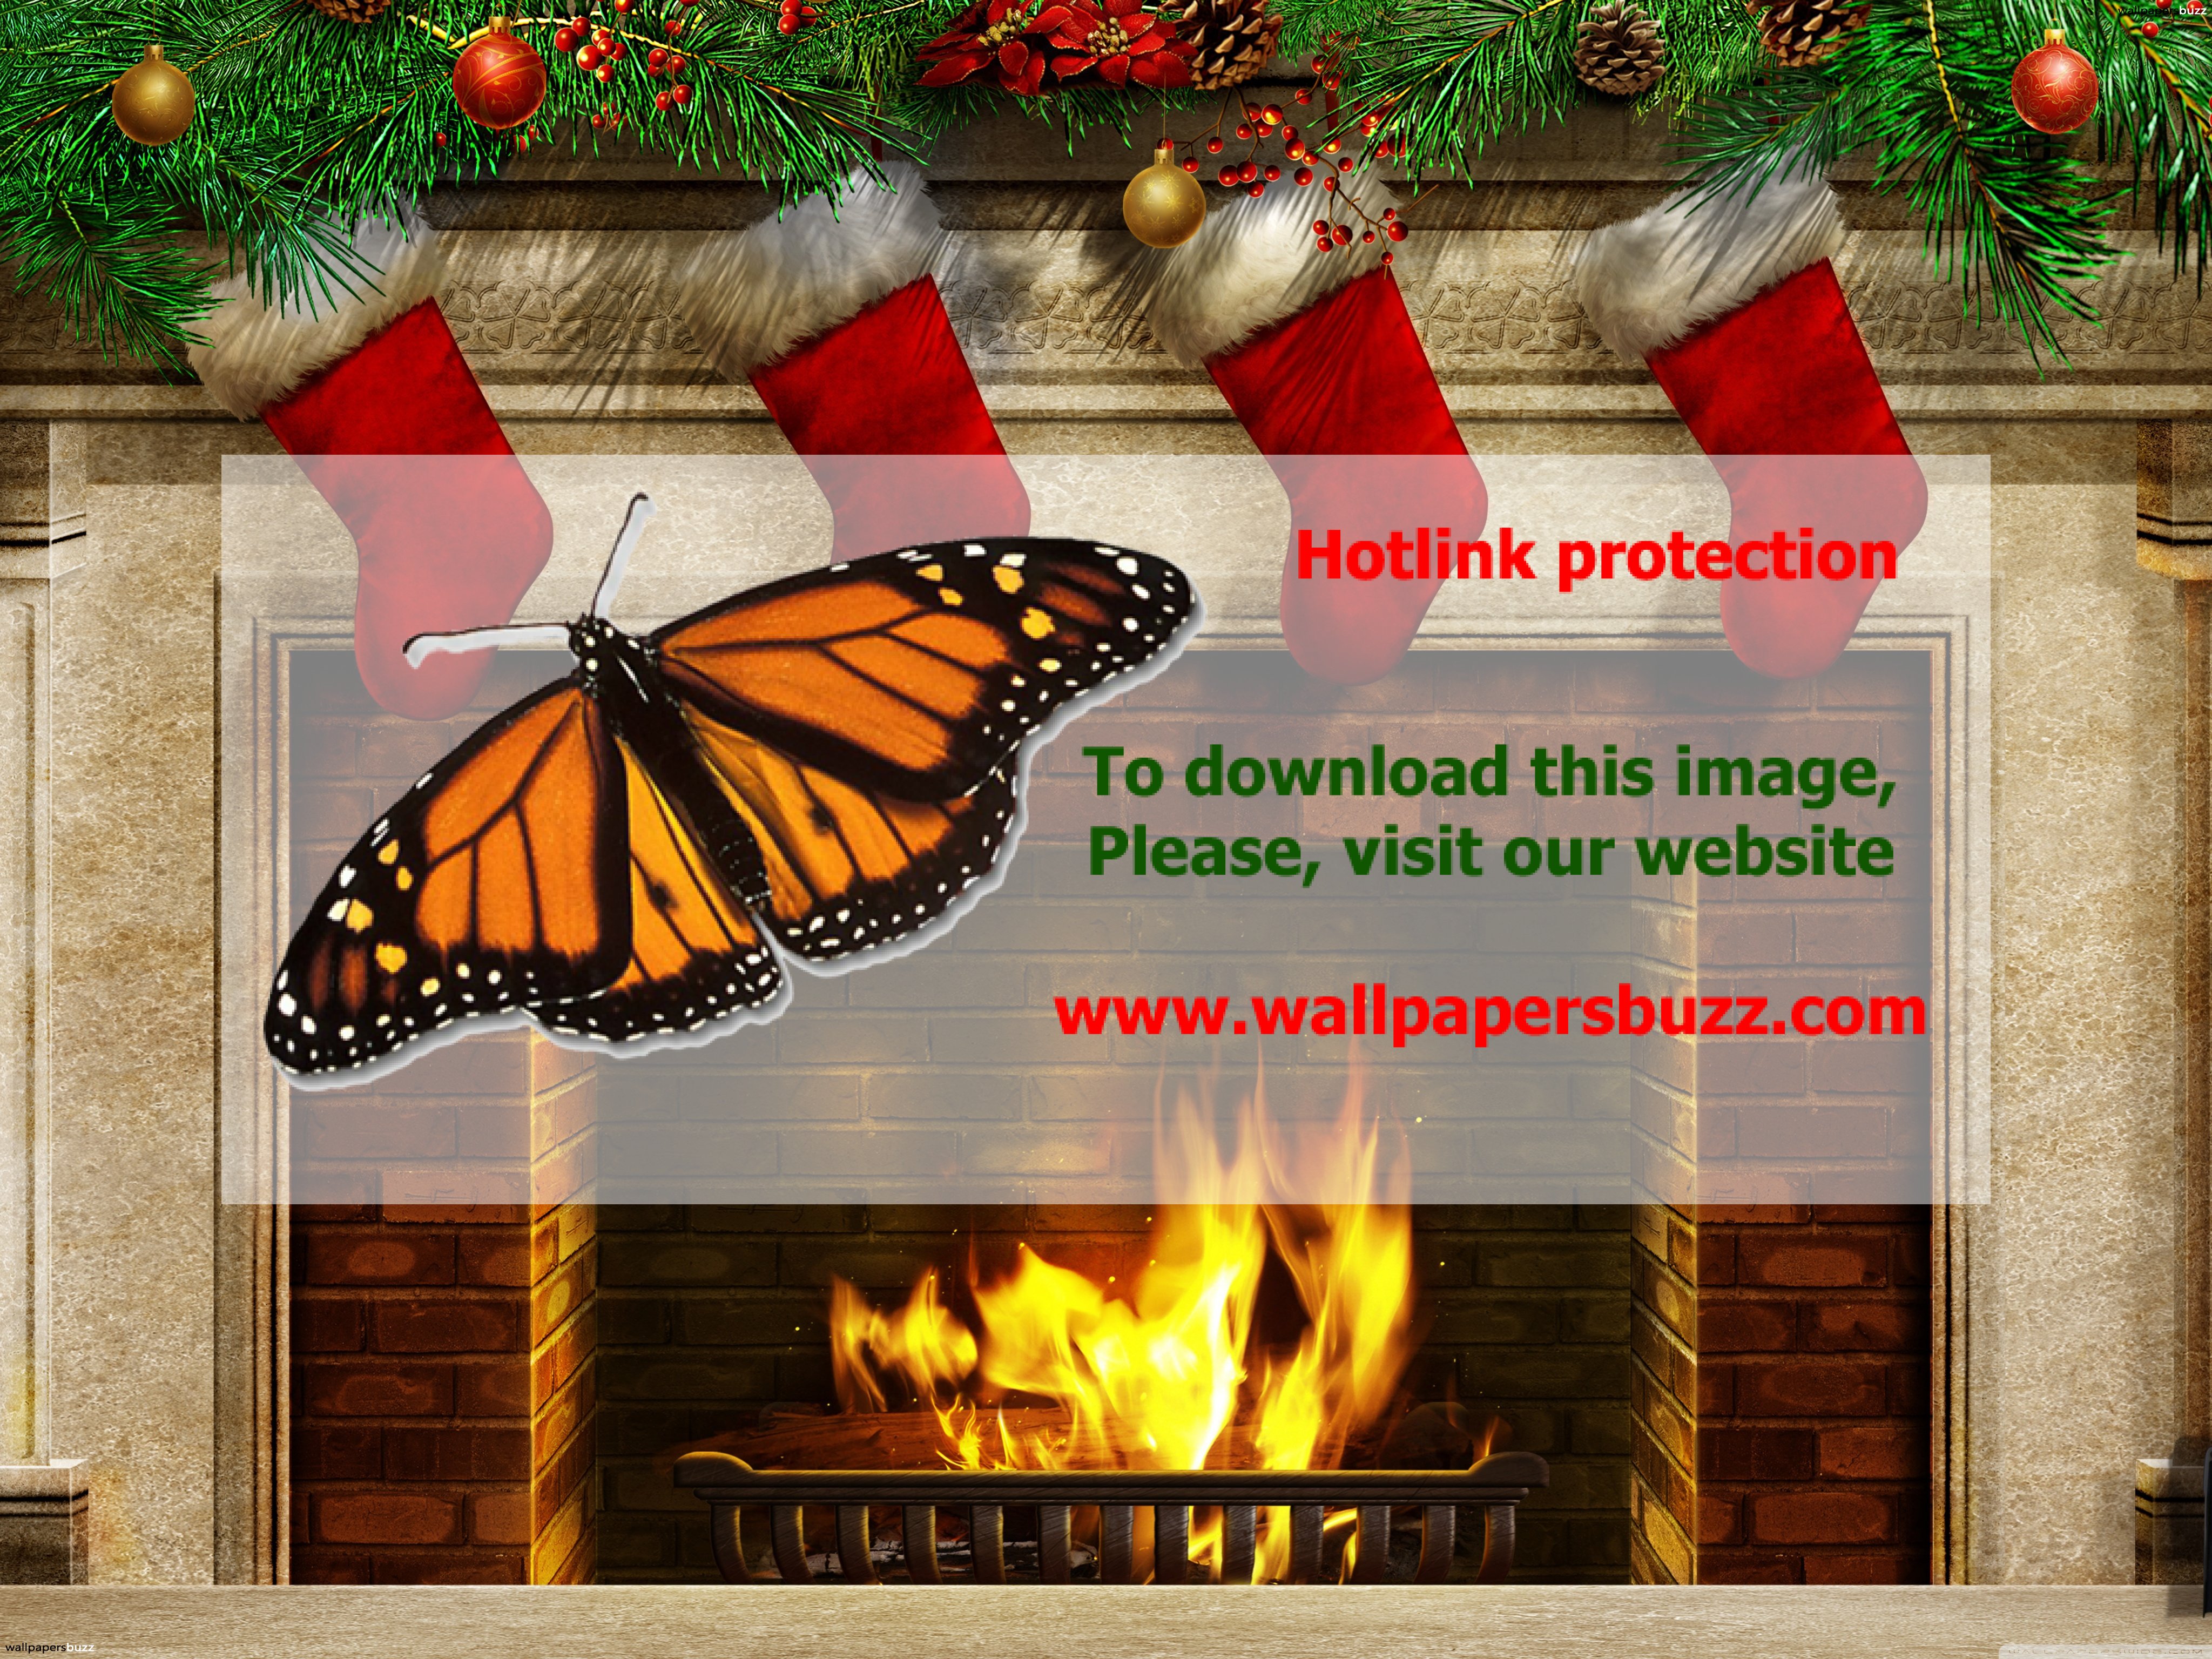 Christmas Stockings Over A Fire - HD Wallpaper 